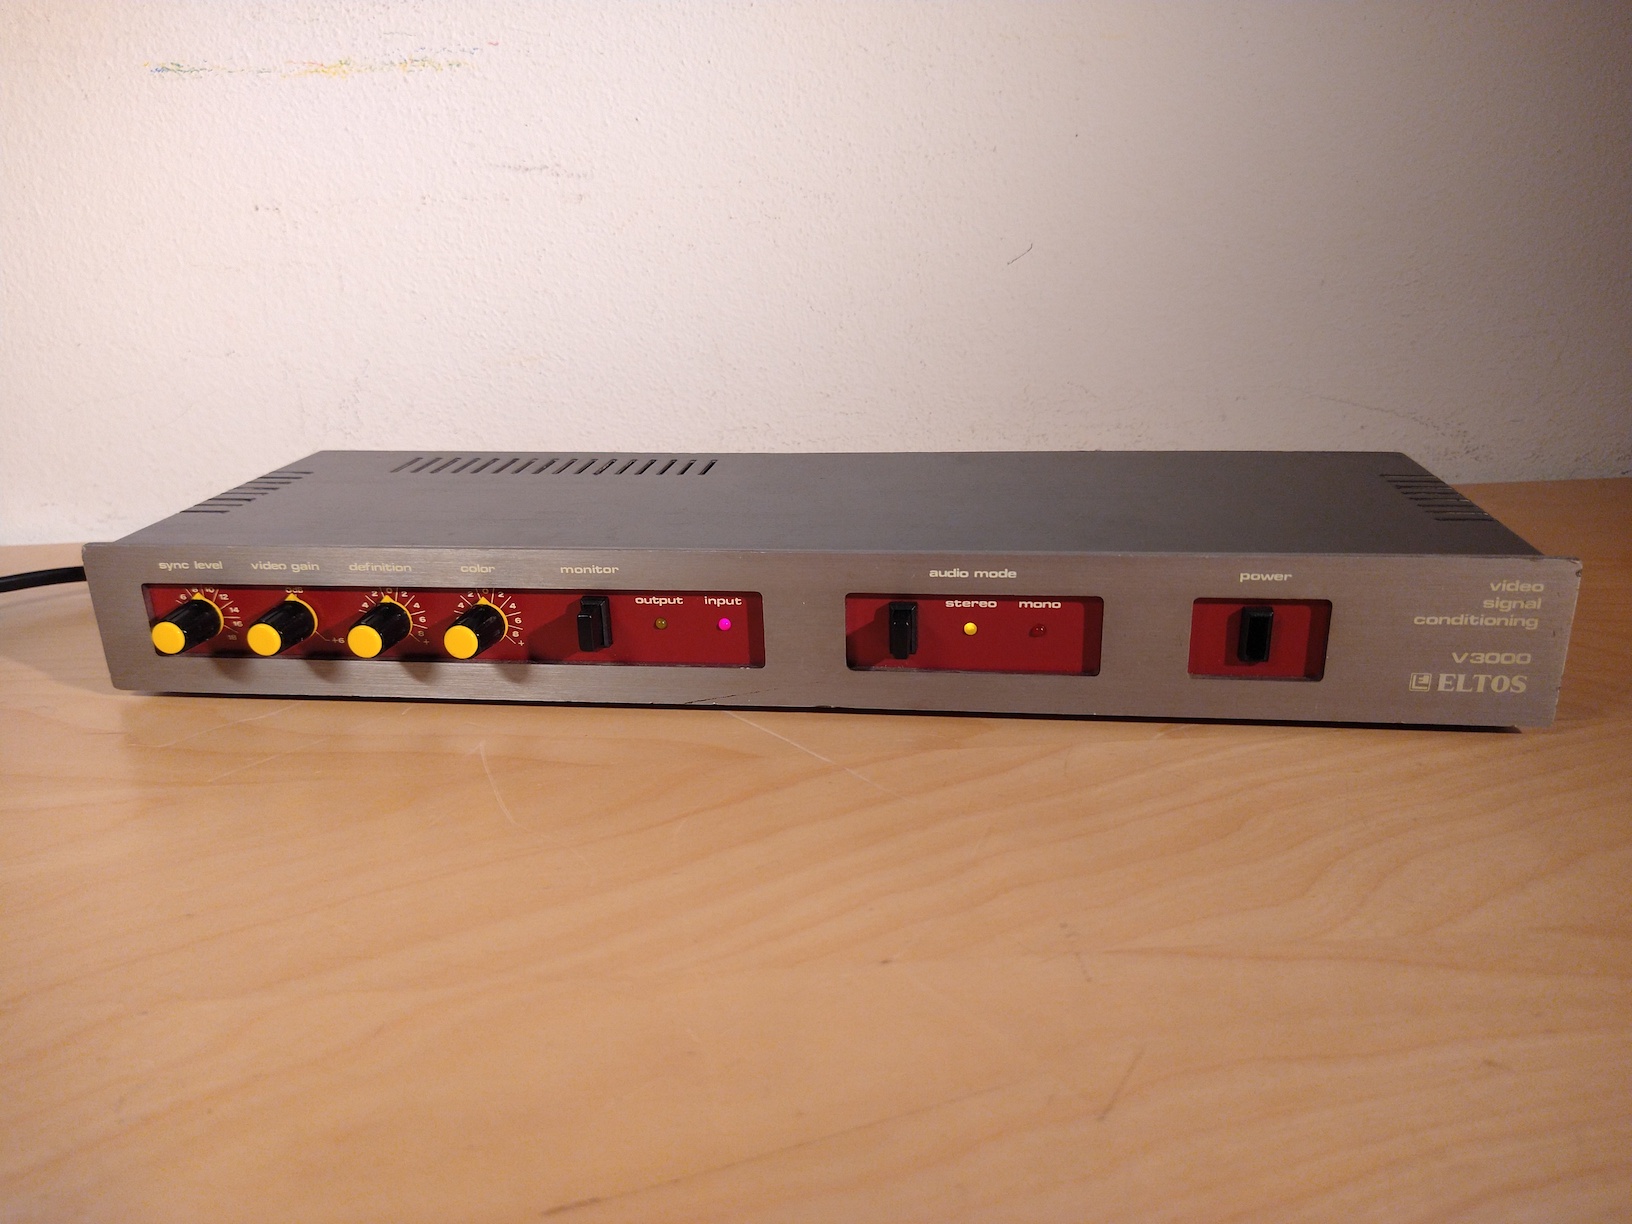 A front video of the Eltos V3000 video signal conditioner.